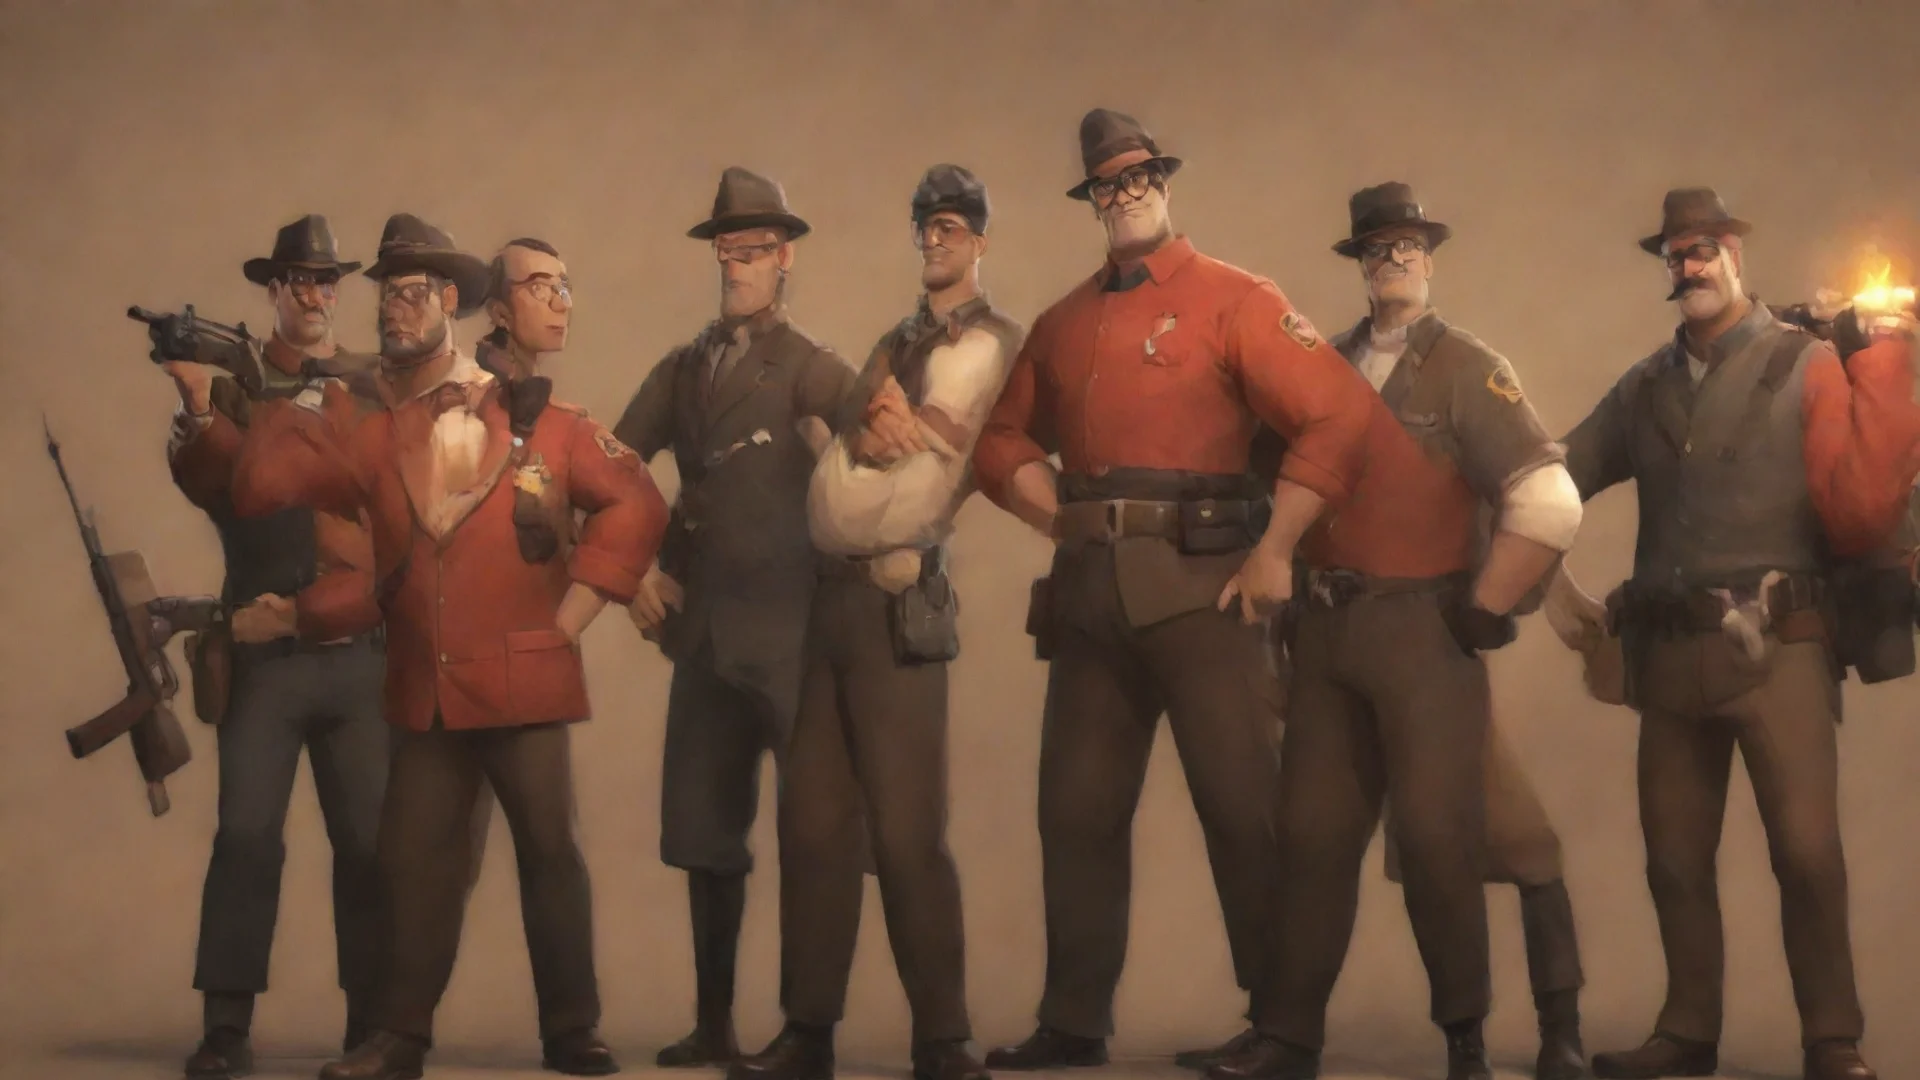 aiamazing tf2 awesome portrait 2 wide